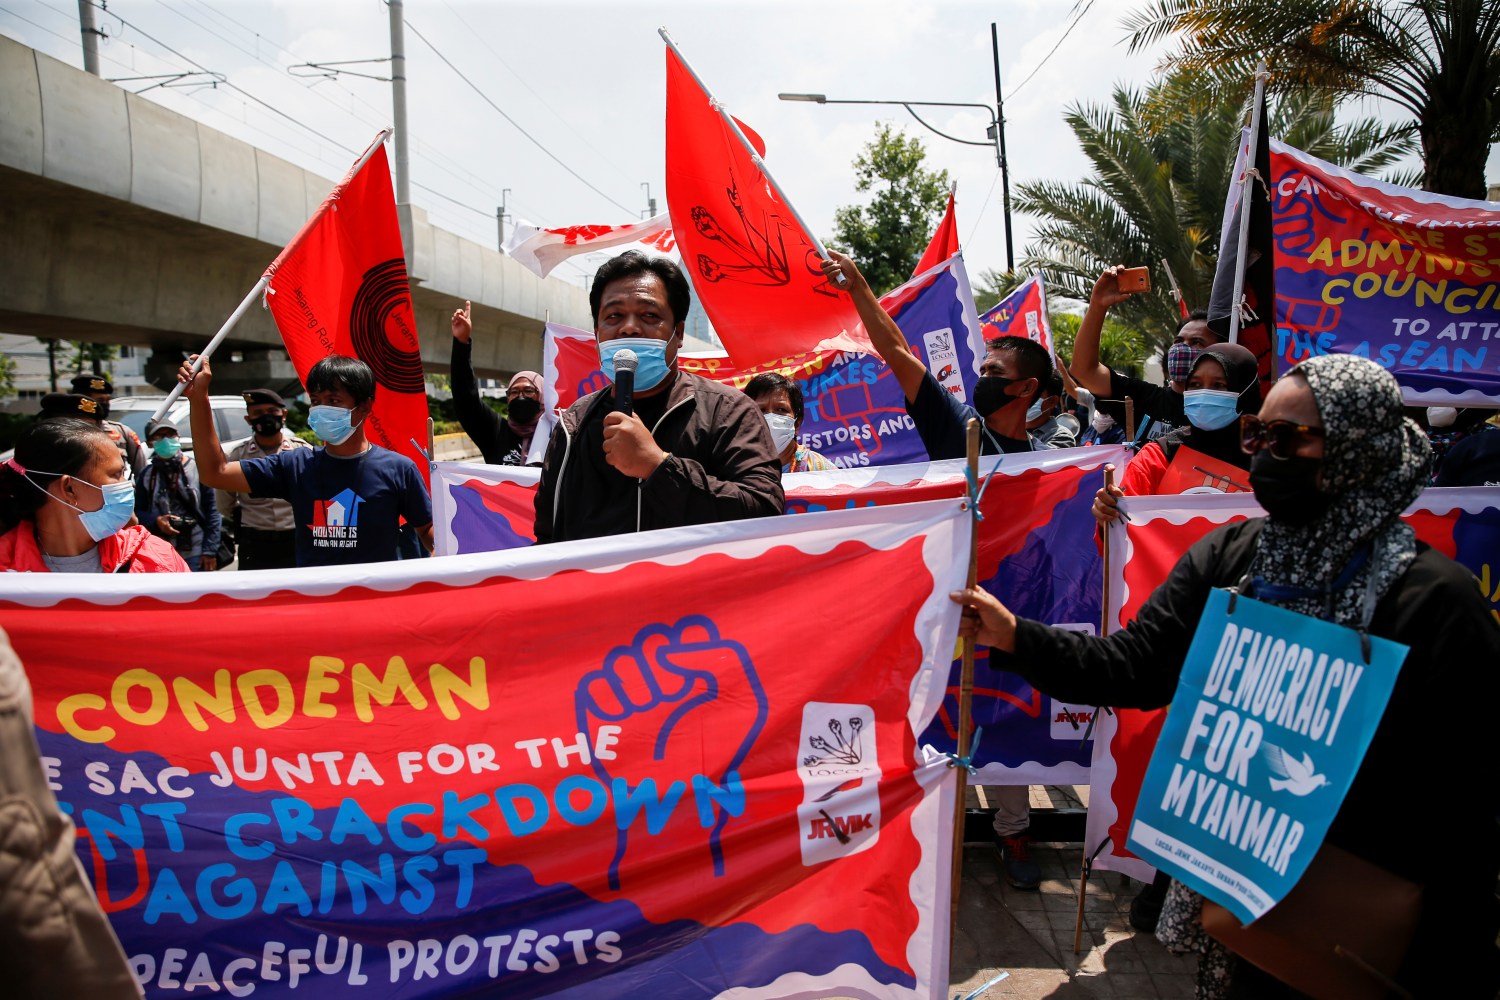 Activists hold placards and banners during a protest to support the anti-coup movement and democracy in Myanmar, near the Association of Southeast Asian Nations (ASEAN) secretariat building, ahead of the ASEAN leaders' meeting in Jakarta, Indonesia April 24, 2021. REUTERS/Willy Kurniawan